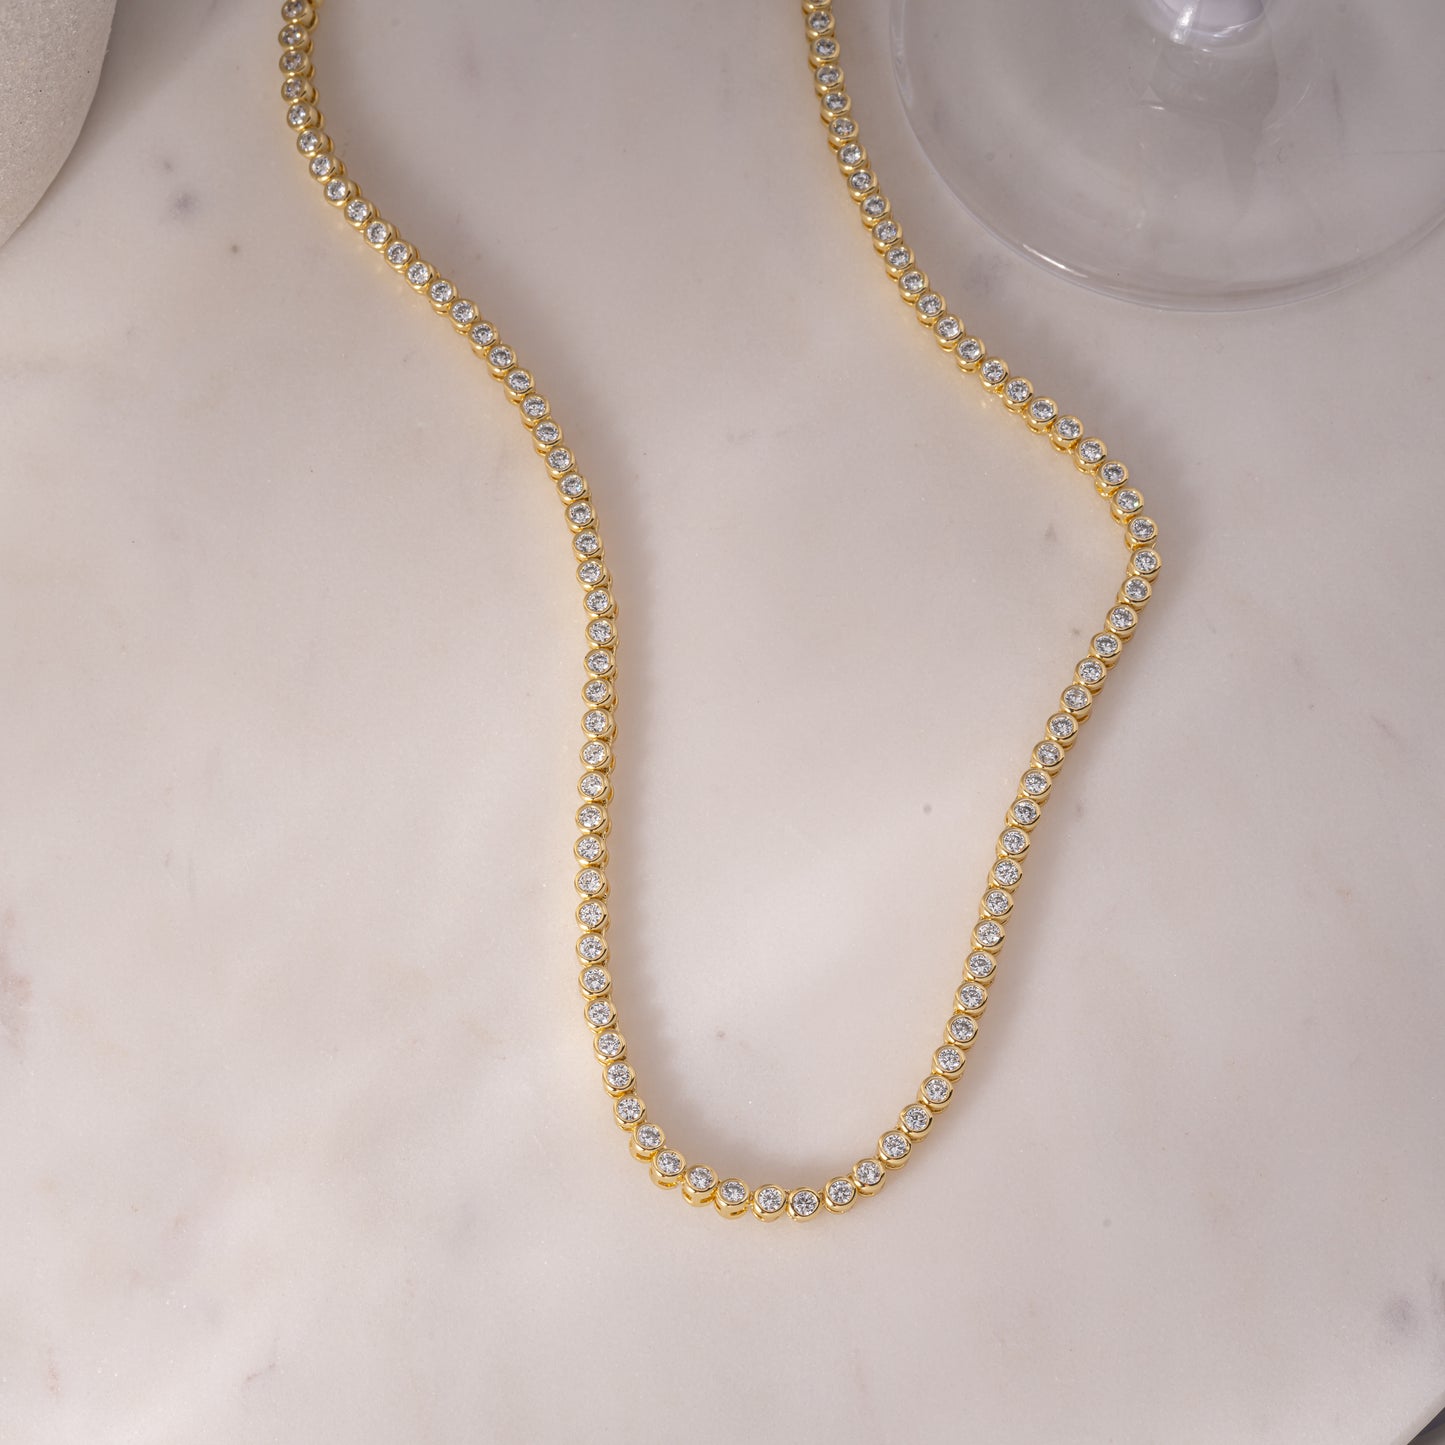 a white marble table with a gold necklace on it